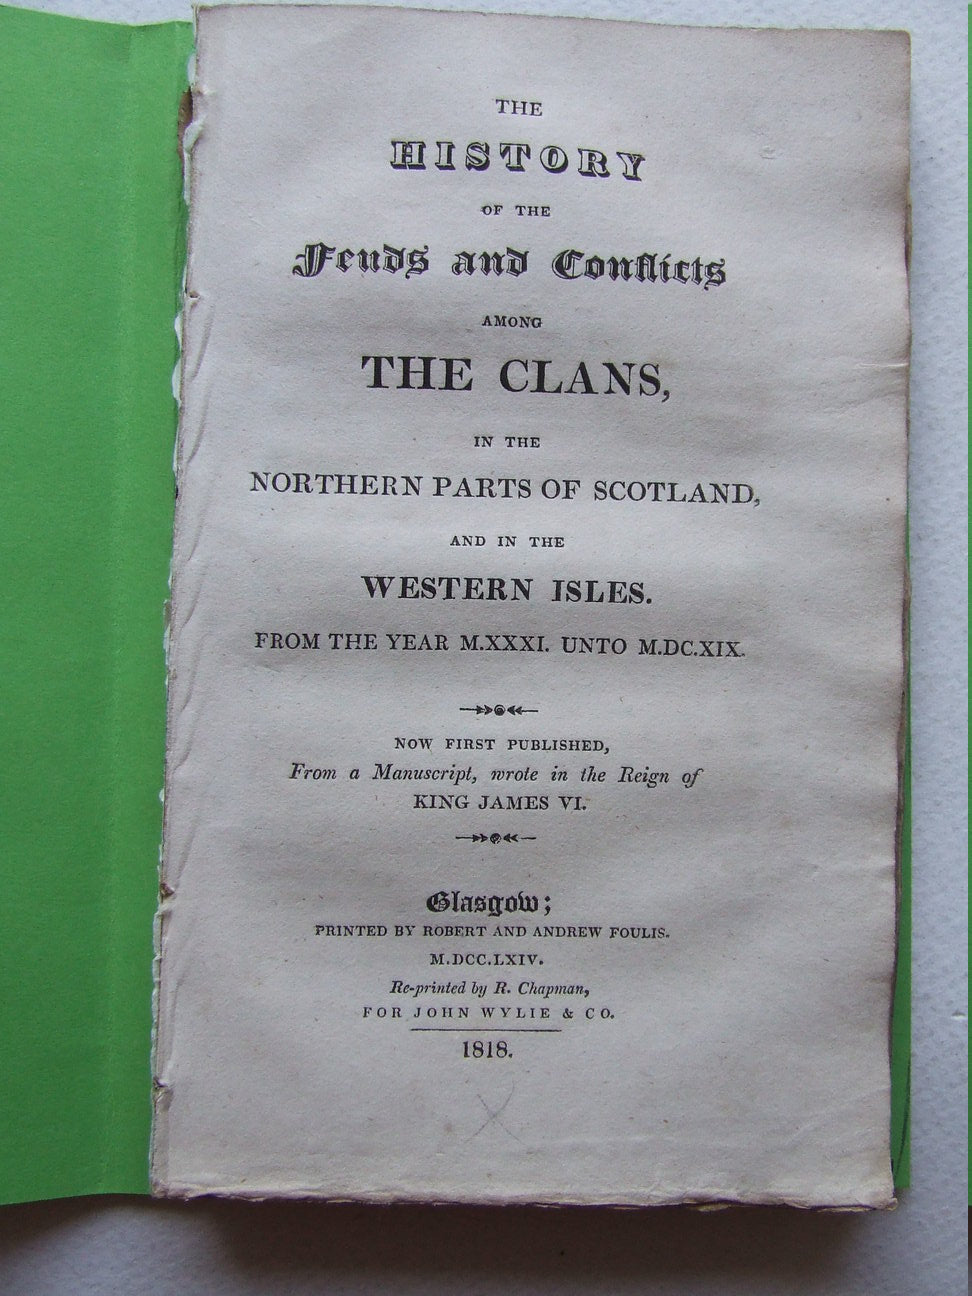 The History of the Feuds and Conflicts among The Clans